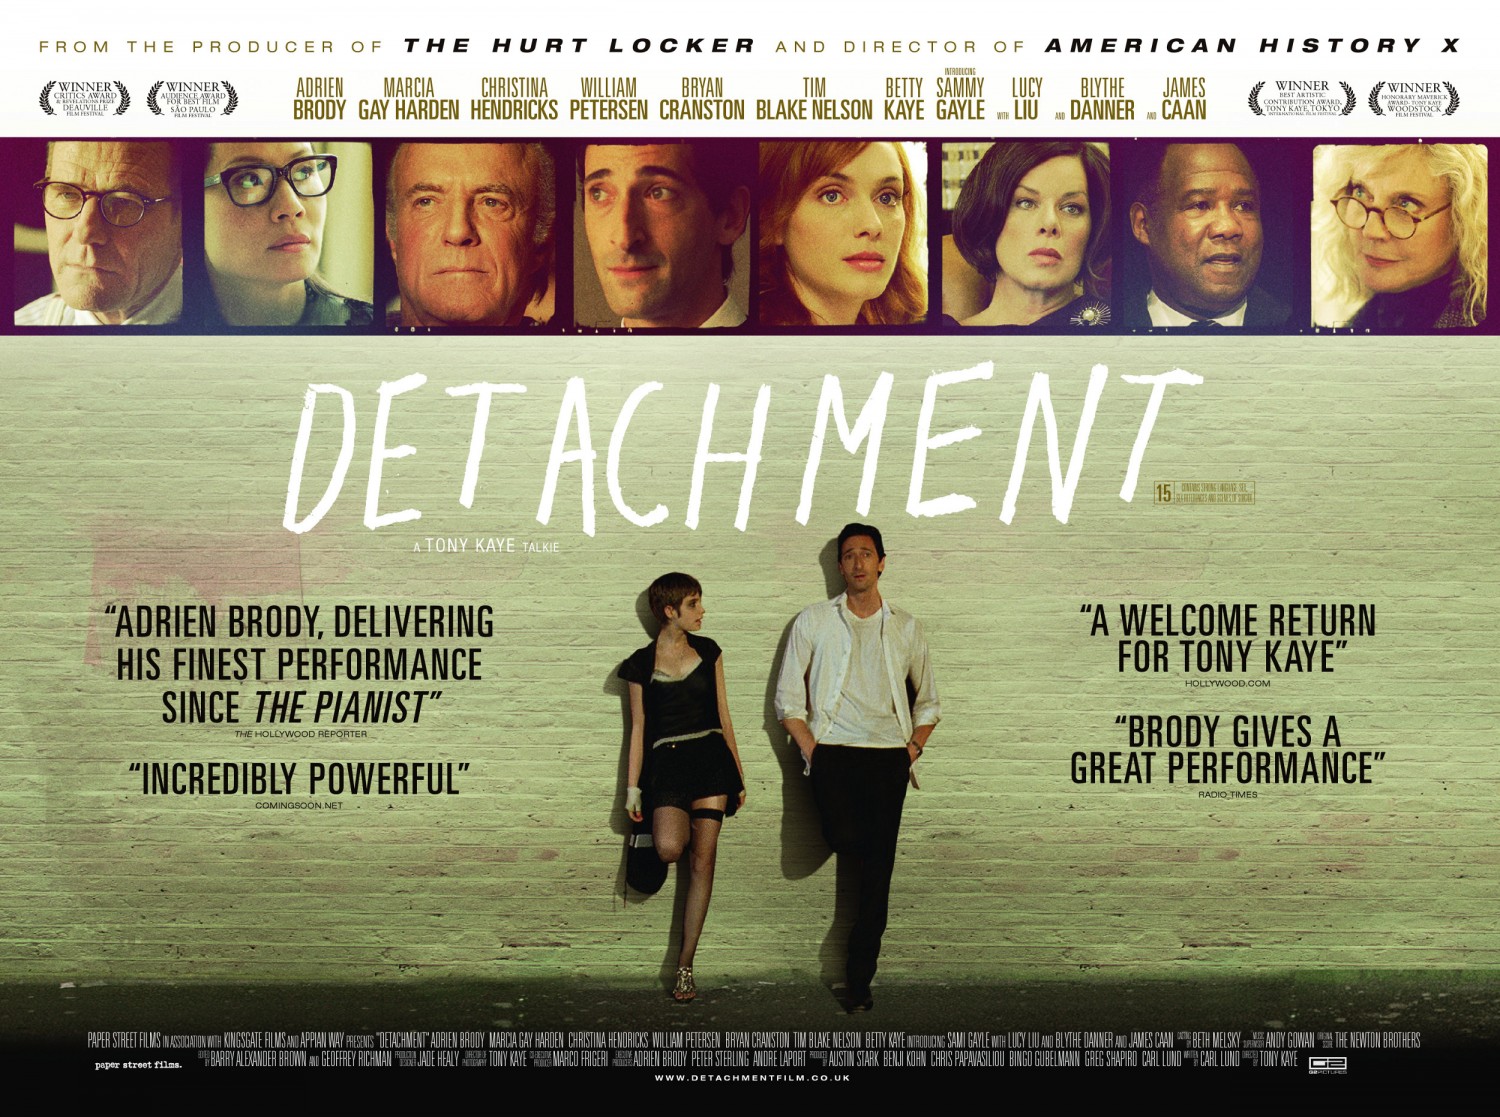 Extra Large Movie Poster Image for Detachment (#5 of 5)